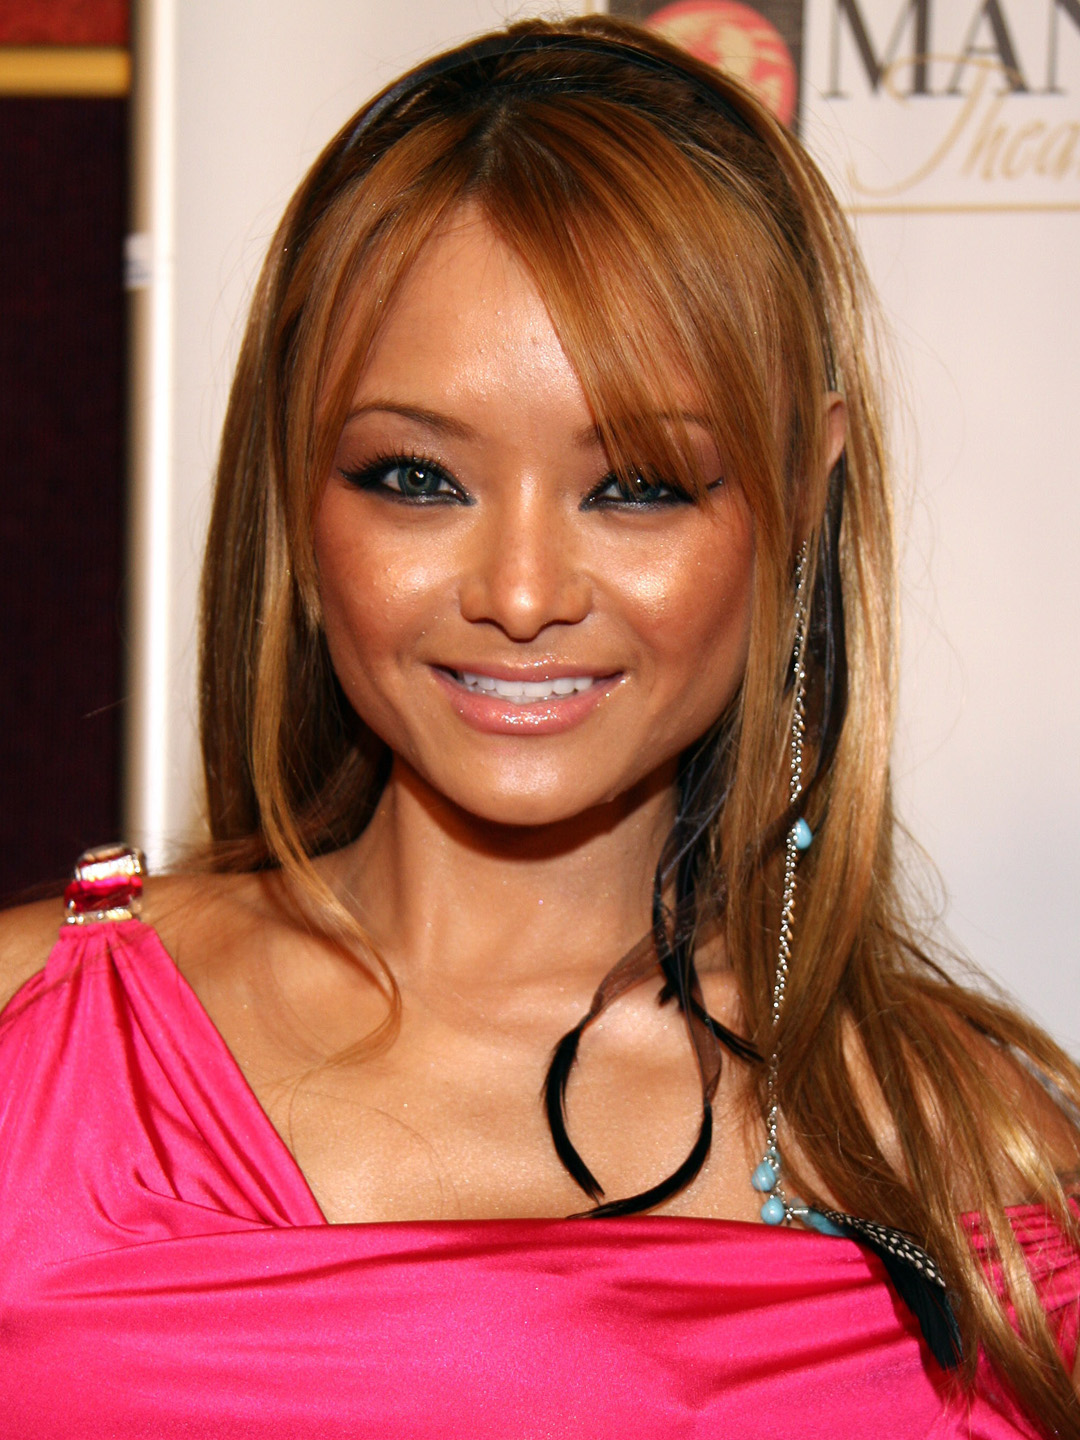 How tall is Tila Tequila?